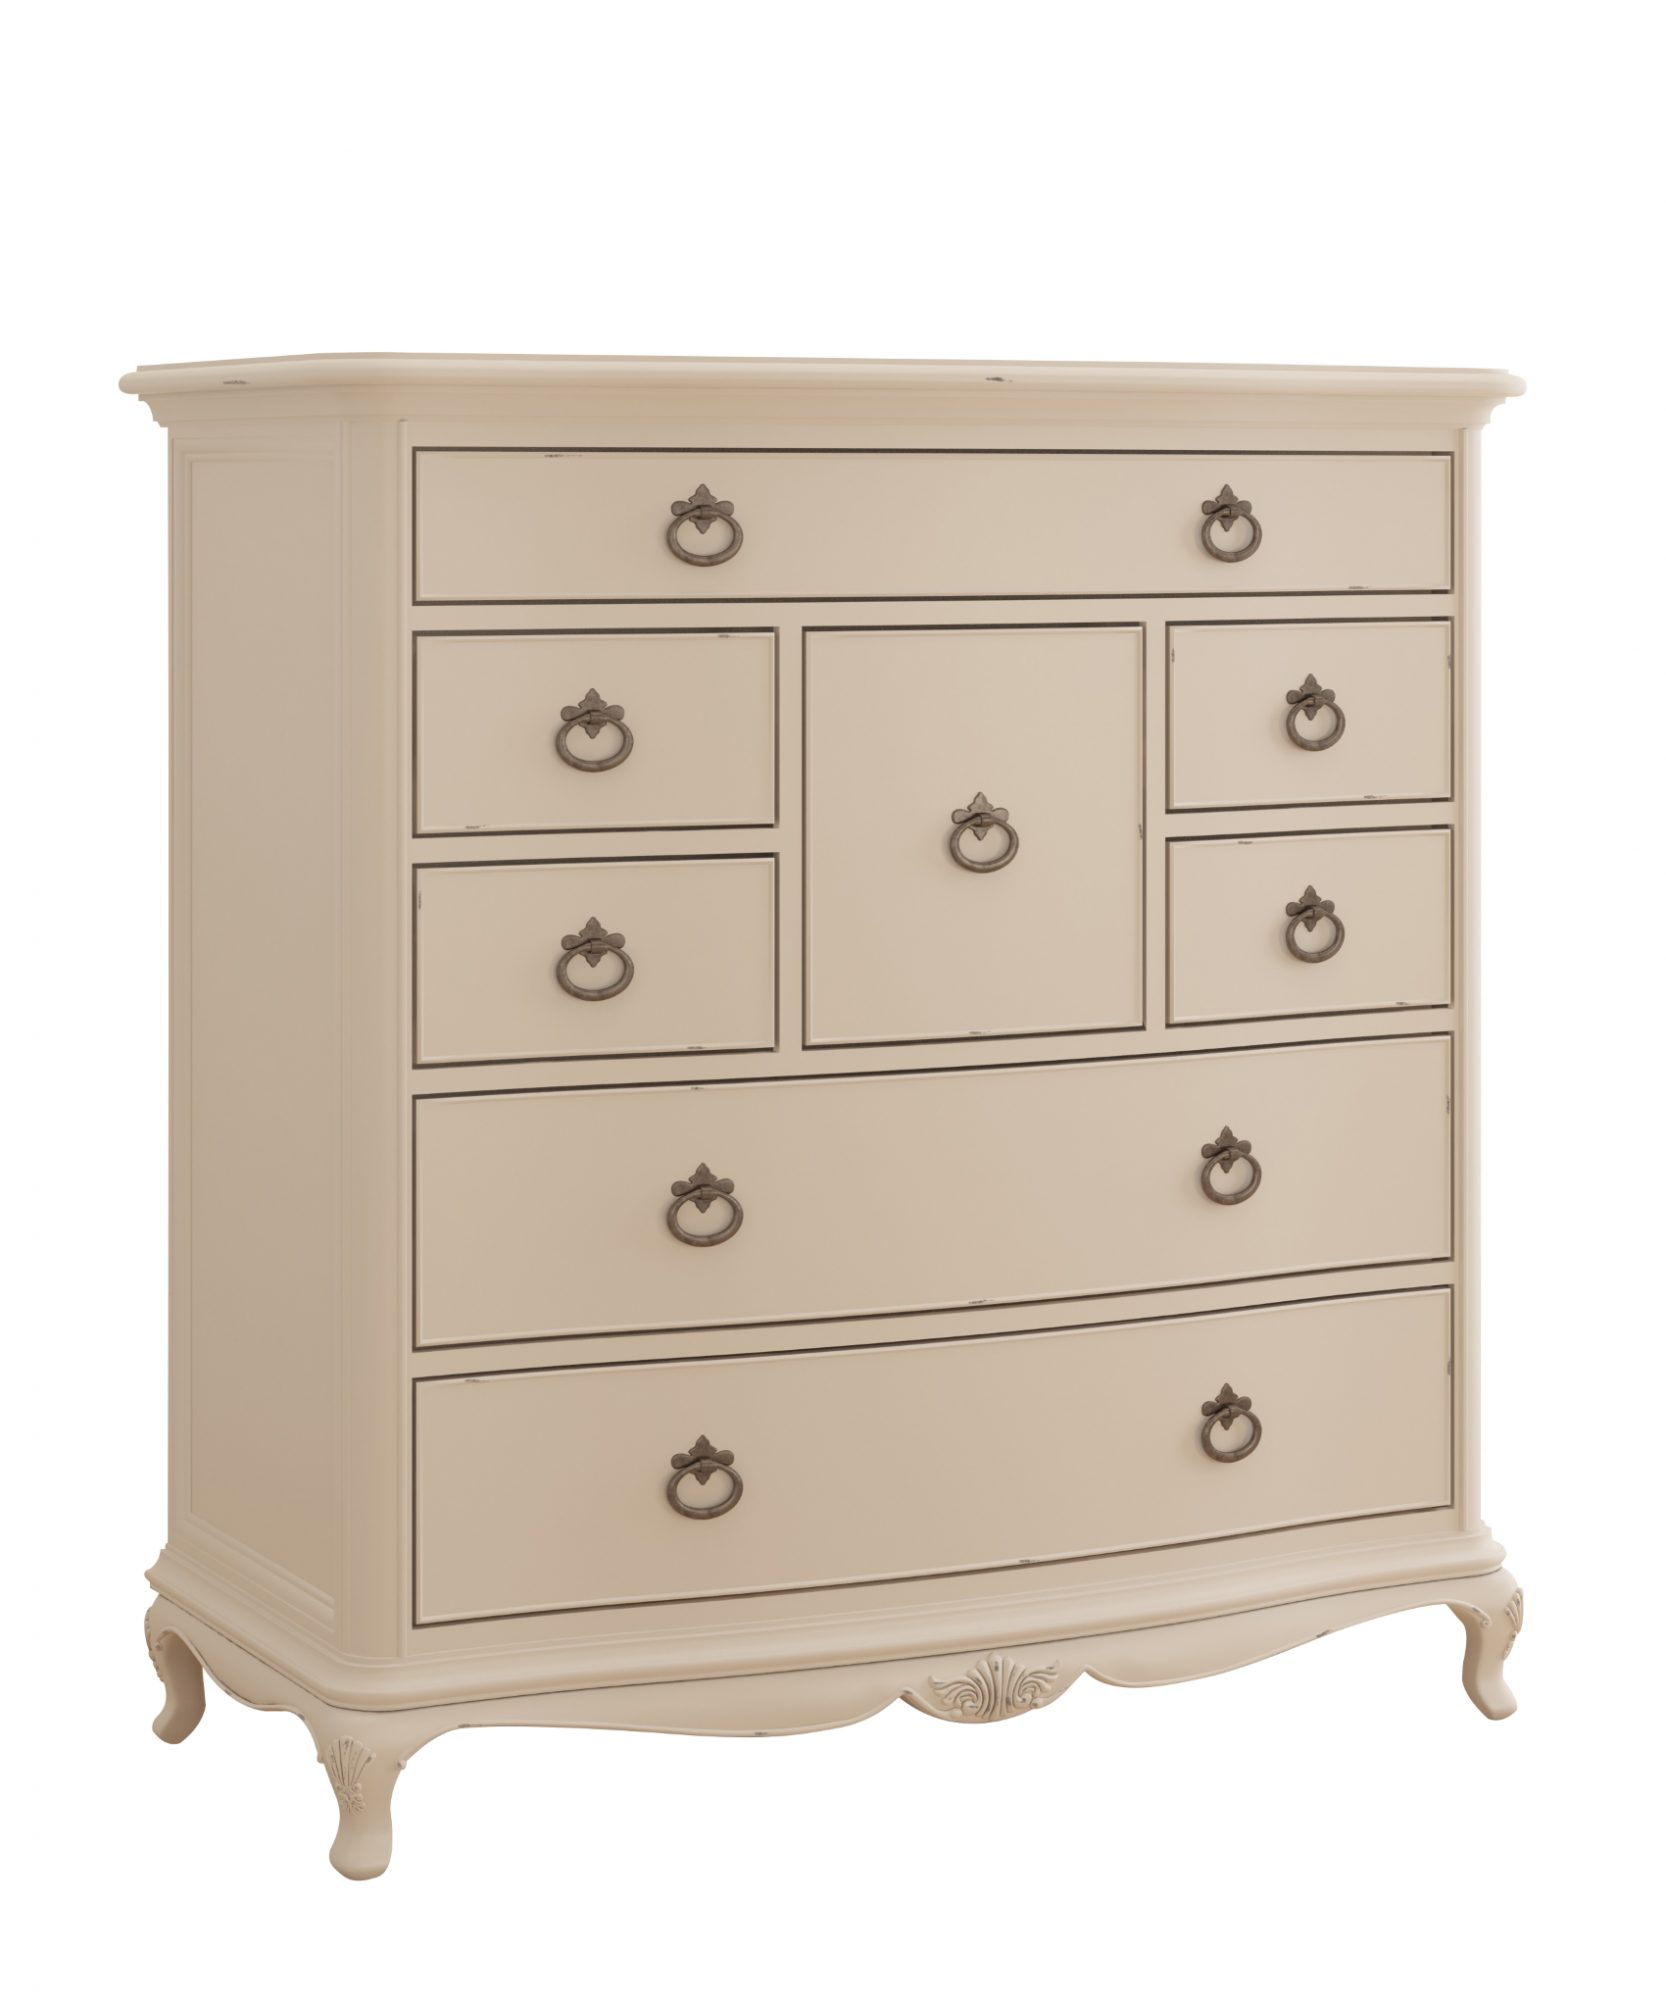 Willis Gambier Wilis Gambier Ivory Tall 8 Drawer Chest Chest